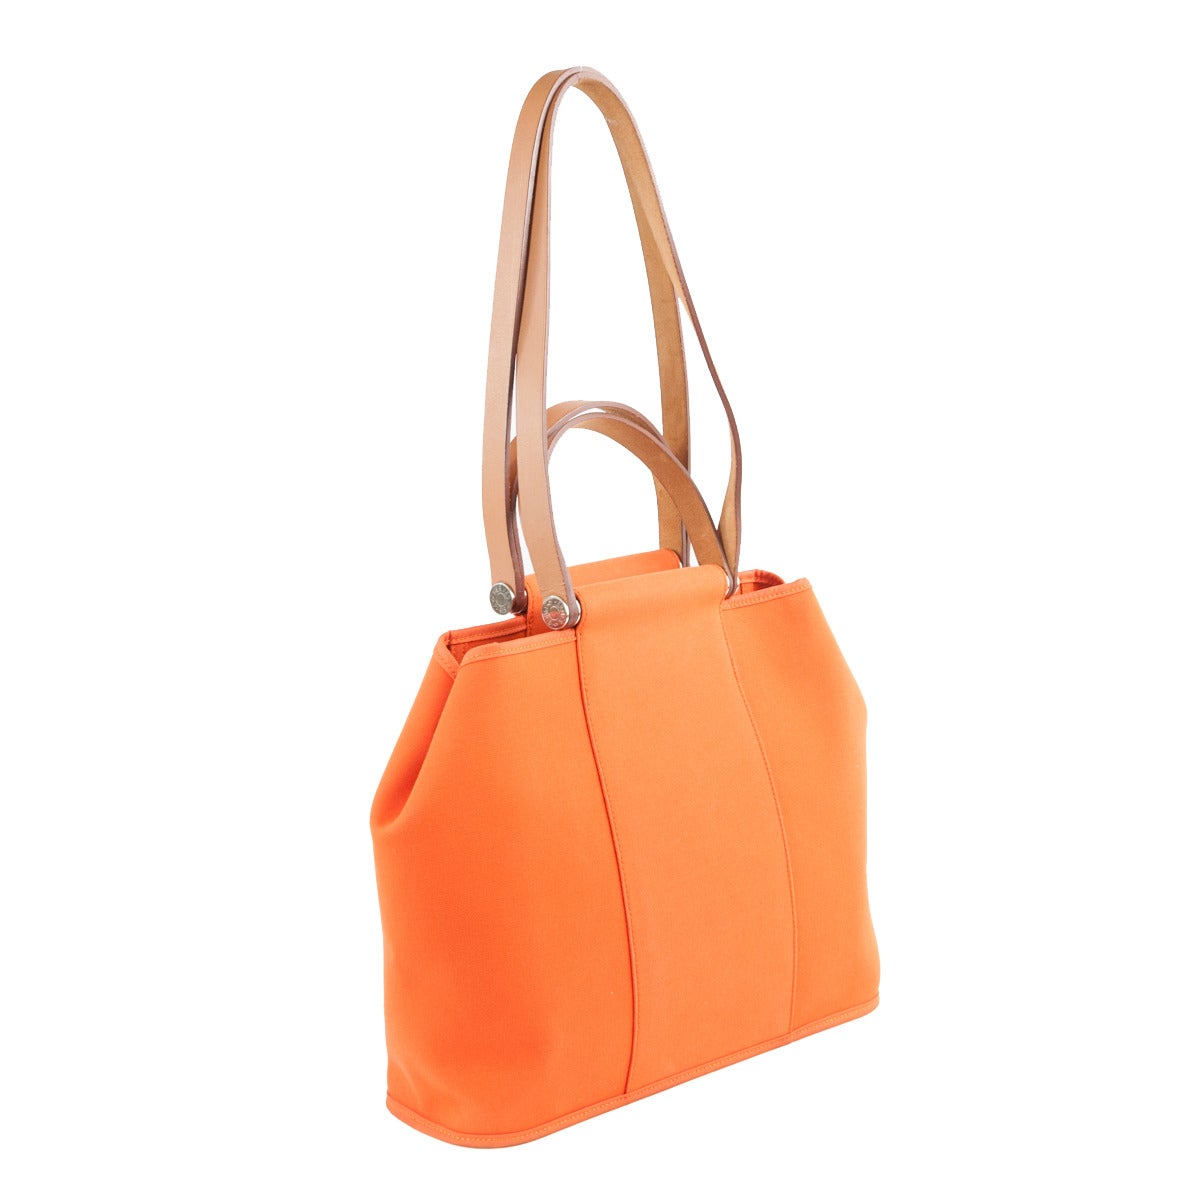 Beautiful and particular Hermès handbag
Classic orange Hermès textile color
Leather handles
Can be carried by hand or as shoulder bag
Particular hexagonal shape
Two inside pockets, one with zip
Cm 32 x 27 x 11 (12.5 x 10.6 x 4.3 inches)
Minor